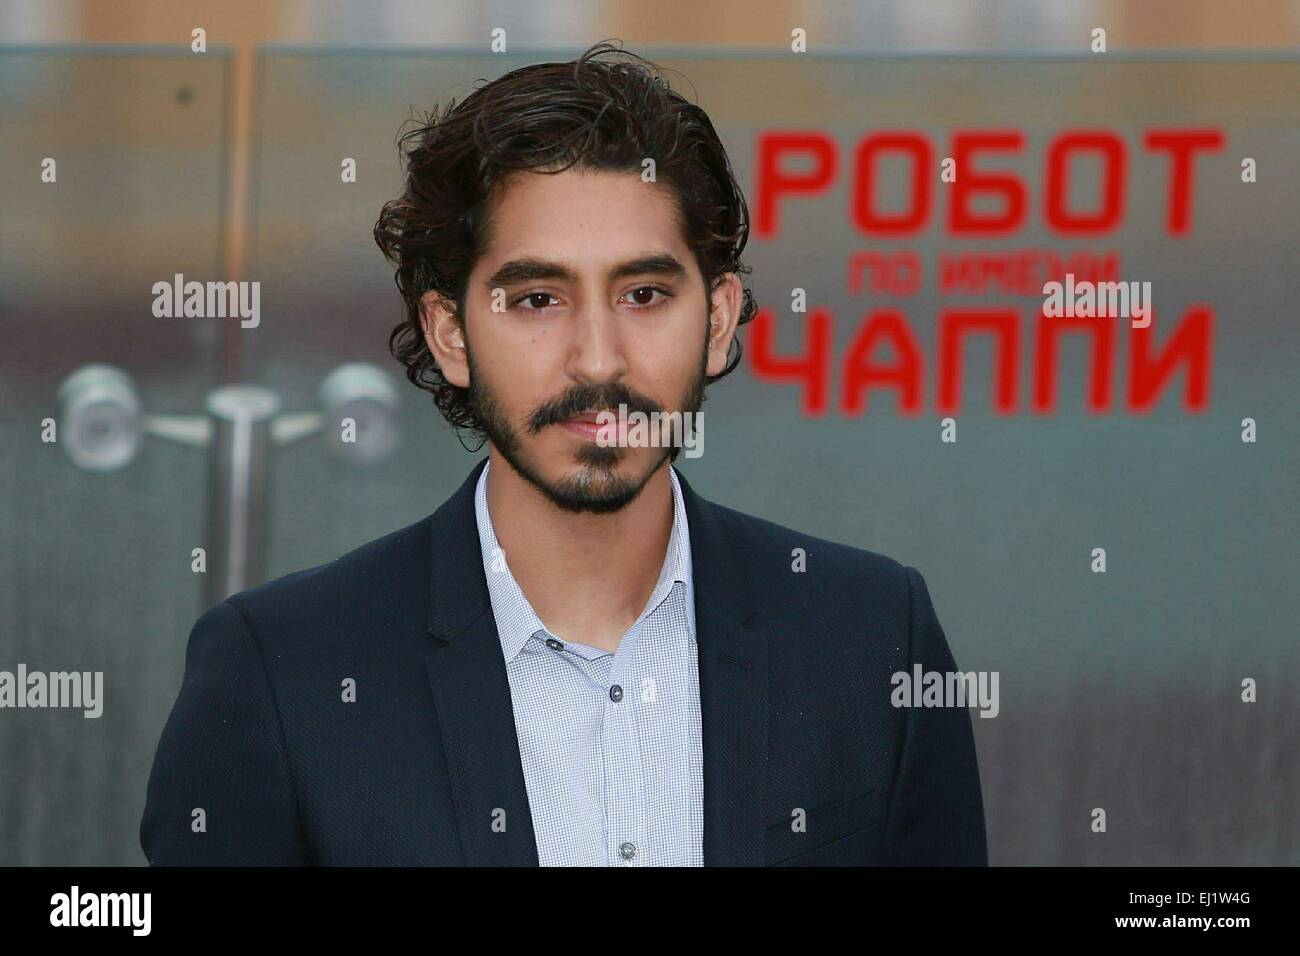 March 1, 2015. Moscow, Russia. Dev Patel poses at a photo call for the film  'Chappie' in Ritz-Carlton Hotel Stock Photo - Alamy